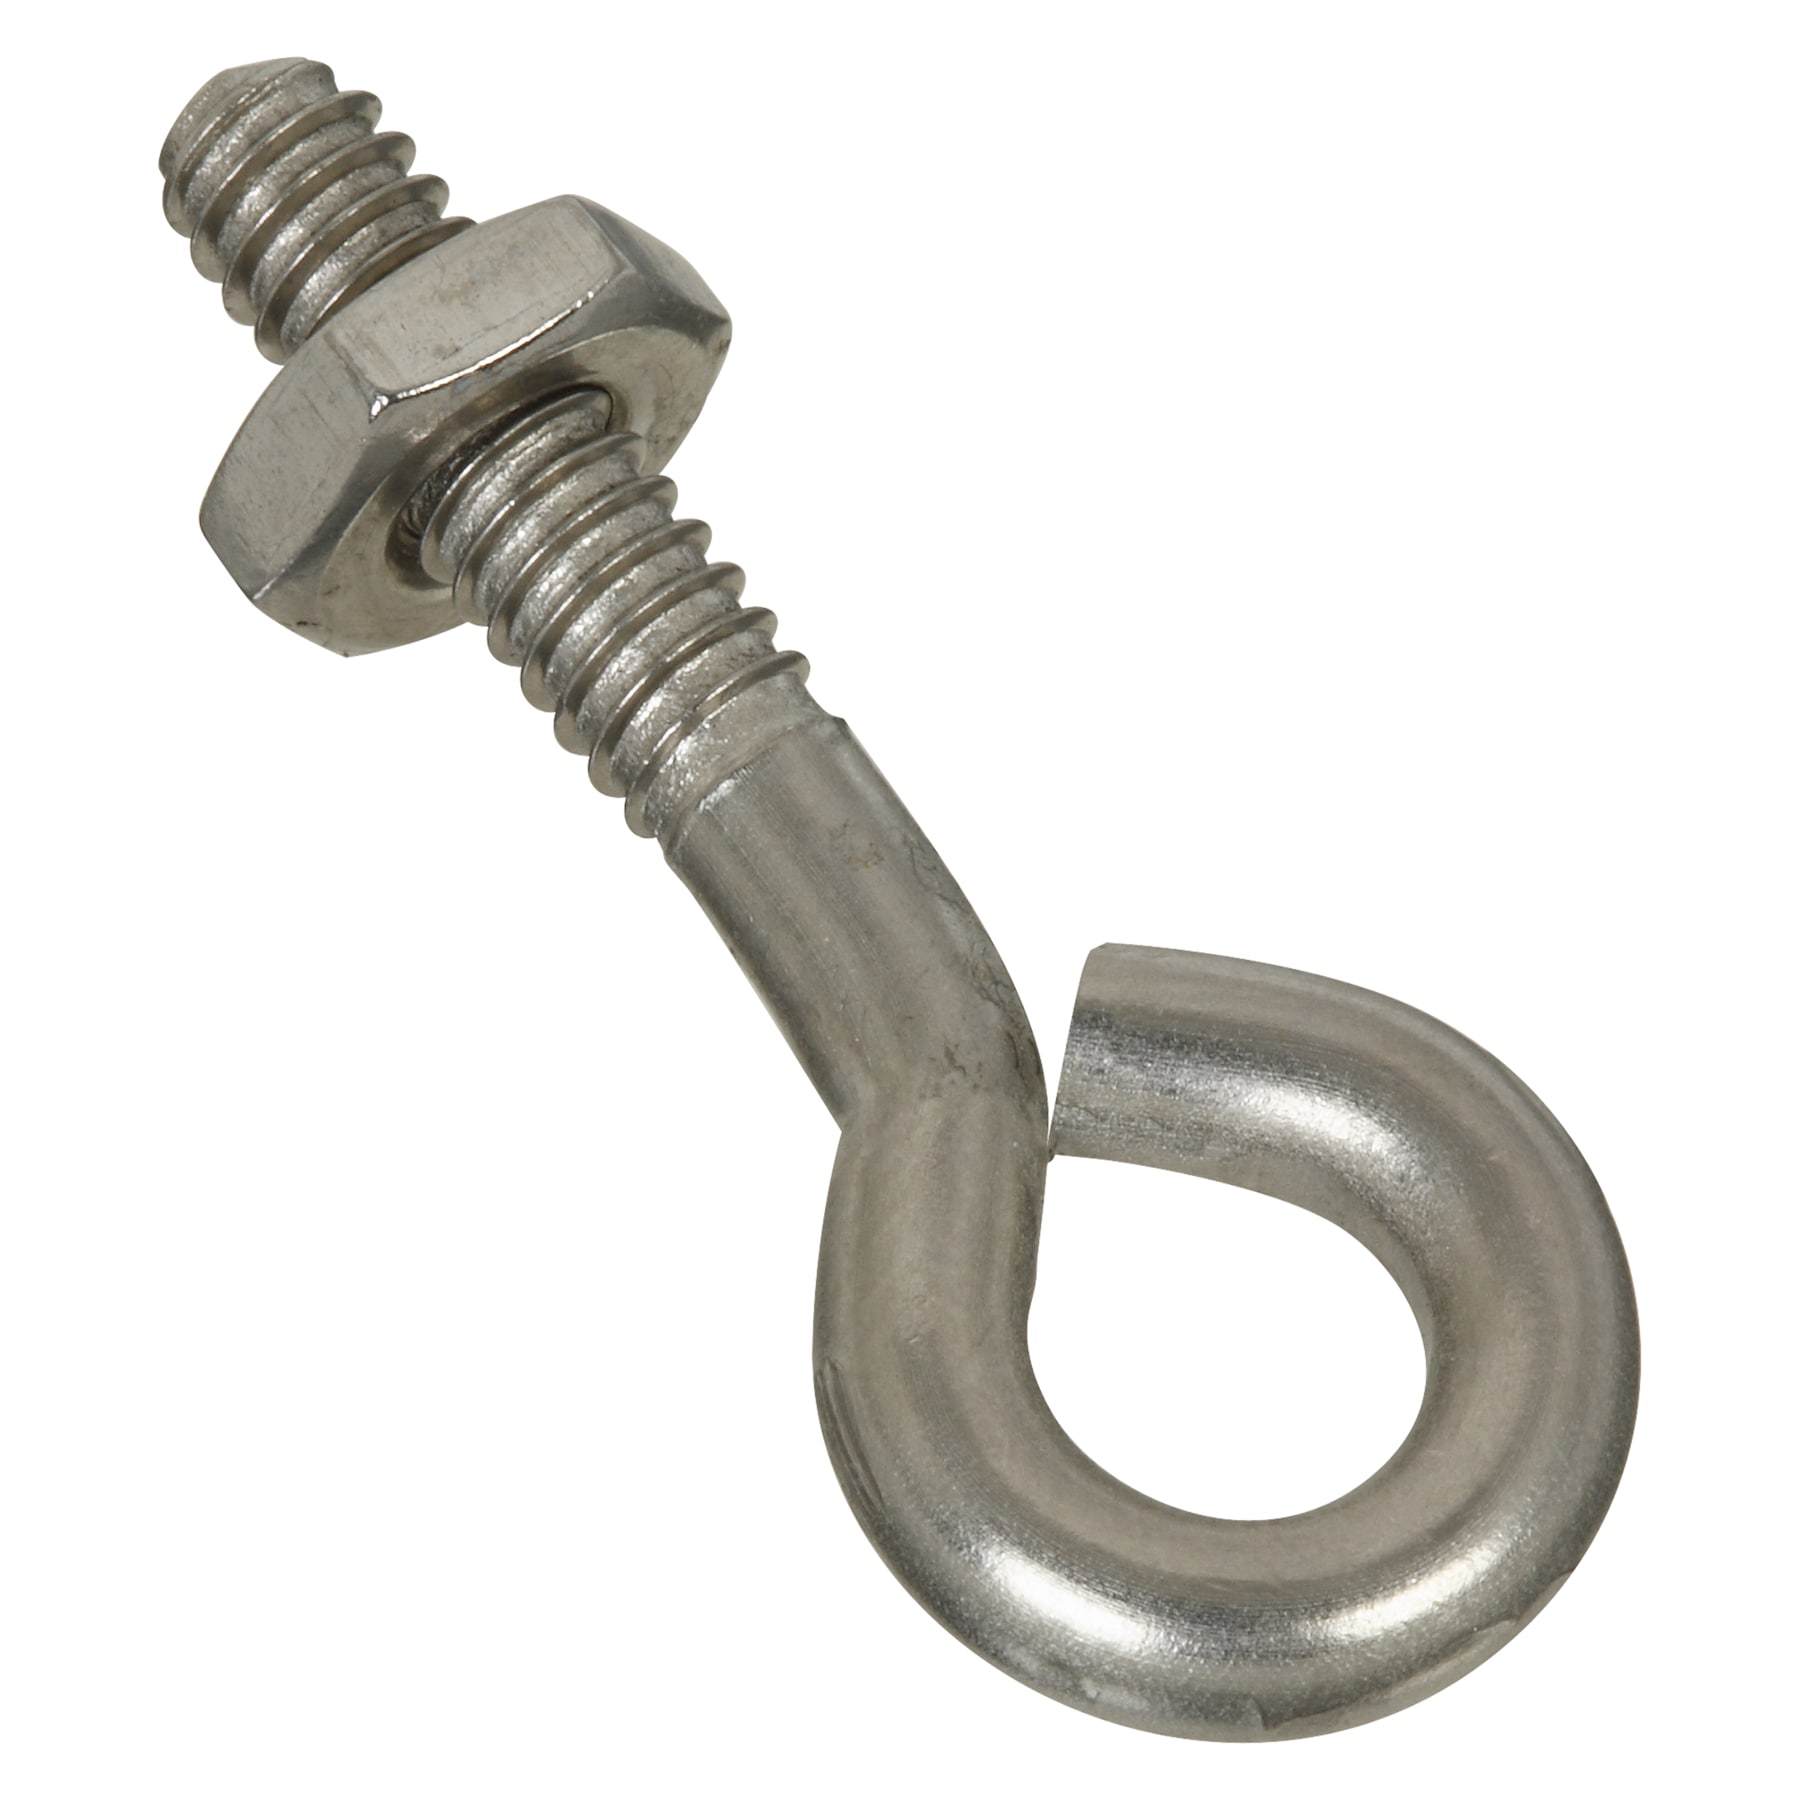 National Hardware N232-918 J Bolt With Hex Nut 5/16 By 3 Inch Zinc Plated  Steel: Hook Bolts & J Hook Bolts (038613228931-1)